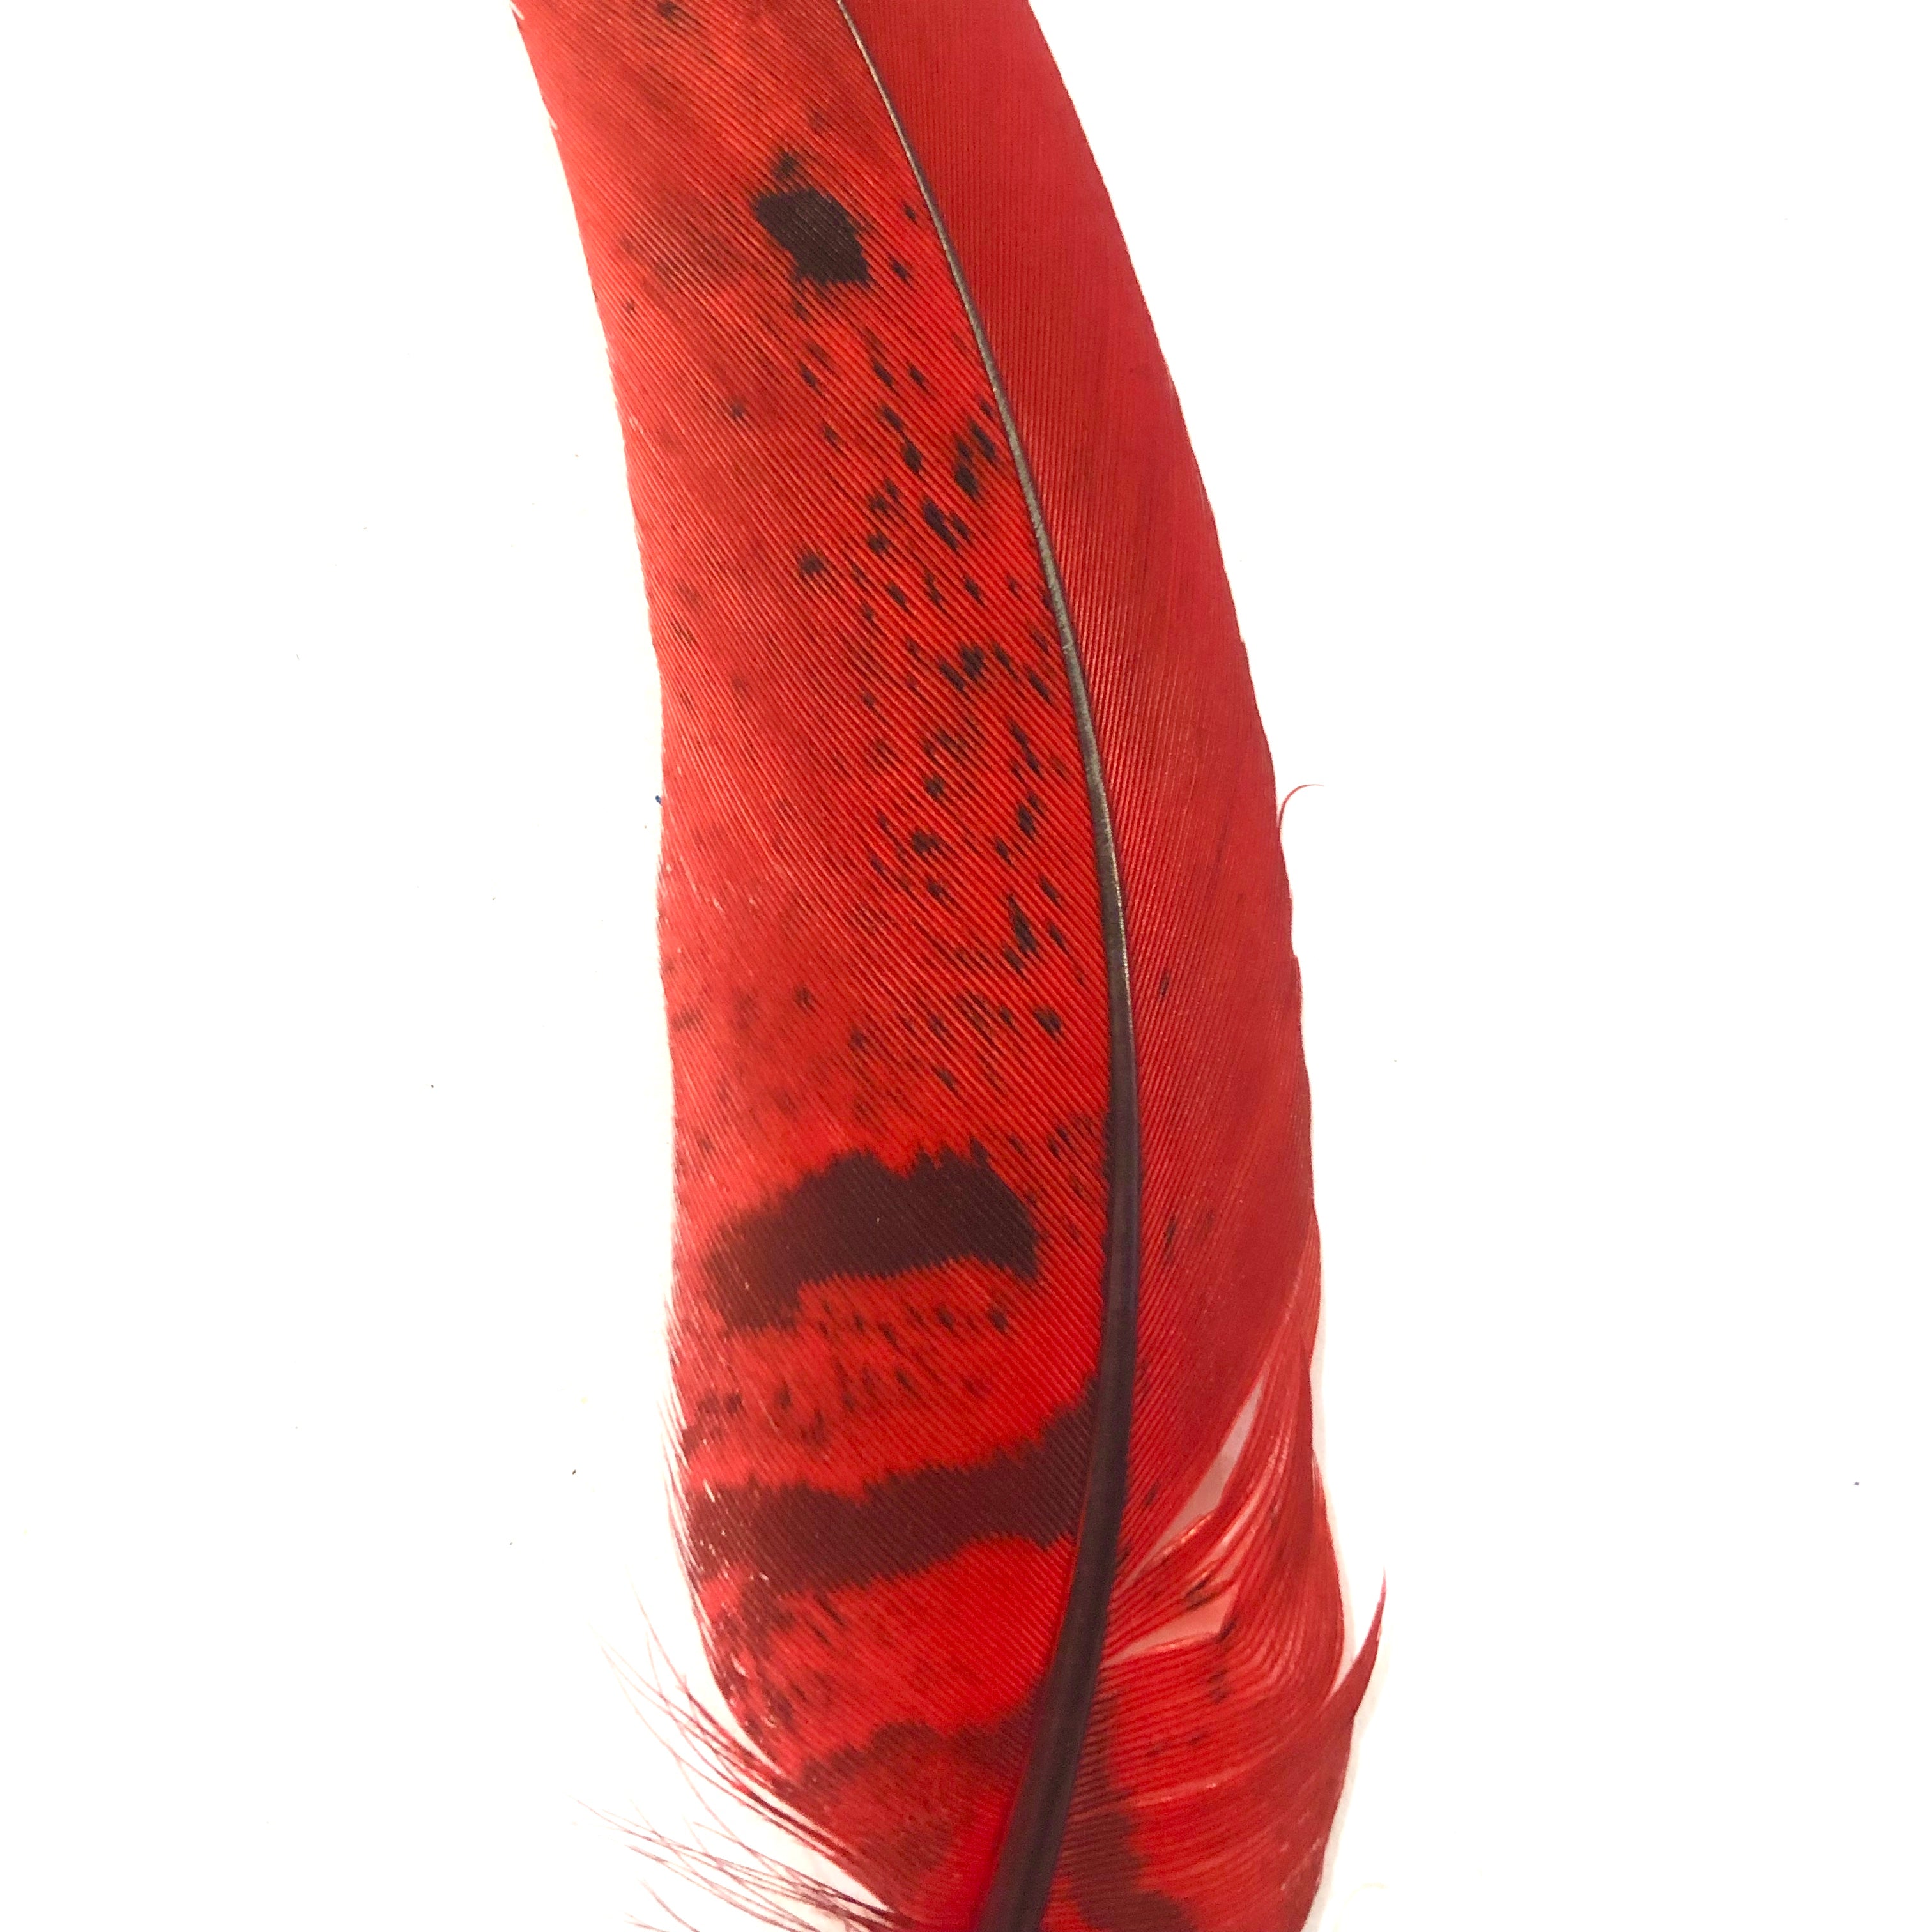 Under 6" Reeves Pheasant Tail Feather x 10 pcs - Red